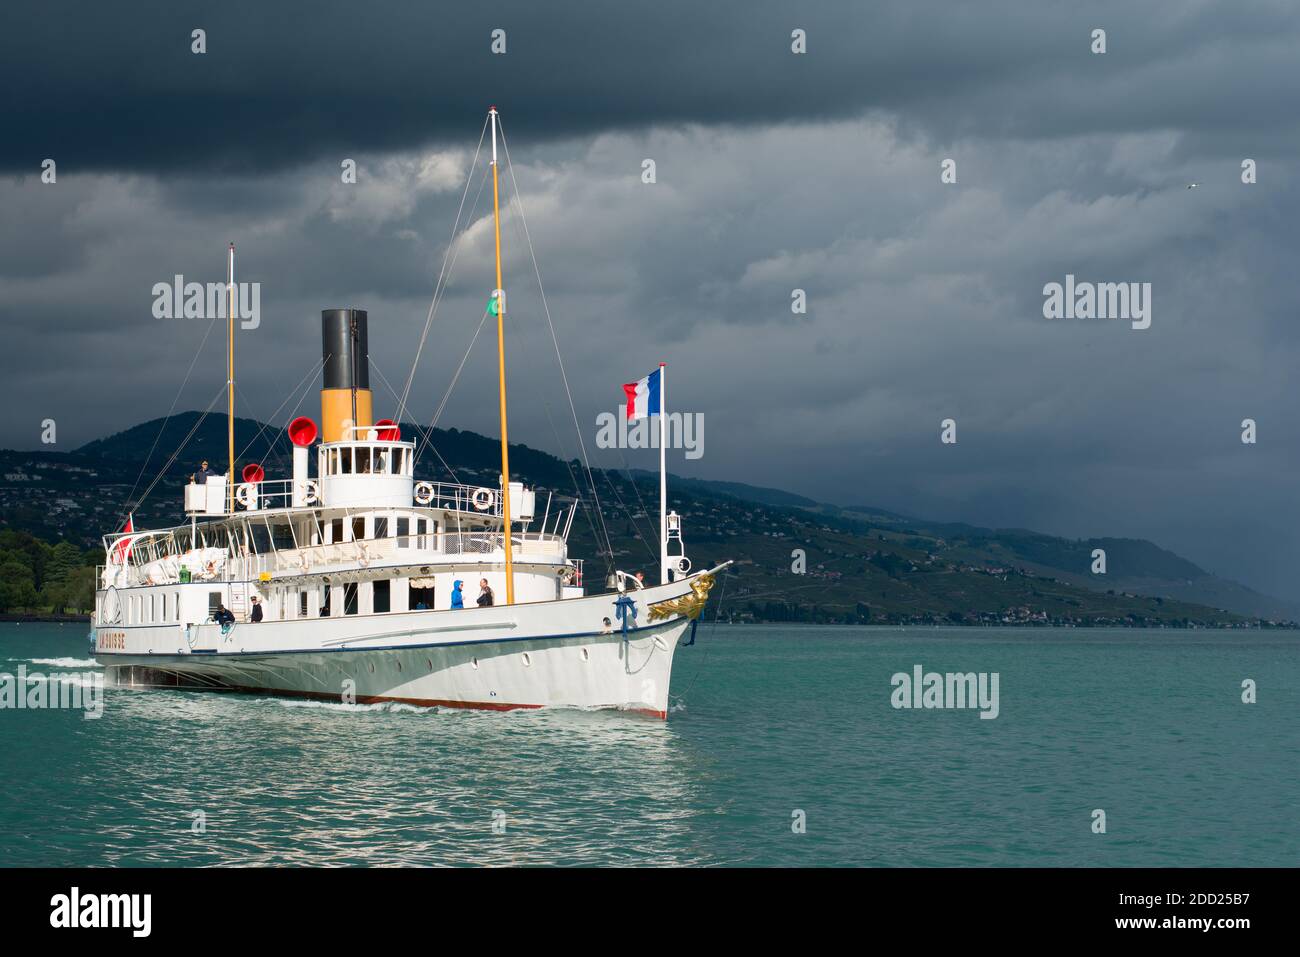 LAUSANNE, SWITZERLAND - June 24, 2013: Steambot 'La Suisse', entered service on May 31, 1910, in 2011 classified as a historic monument by the canton of Vaud. Stock Photo